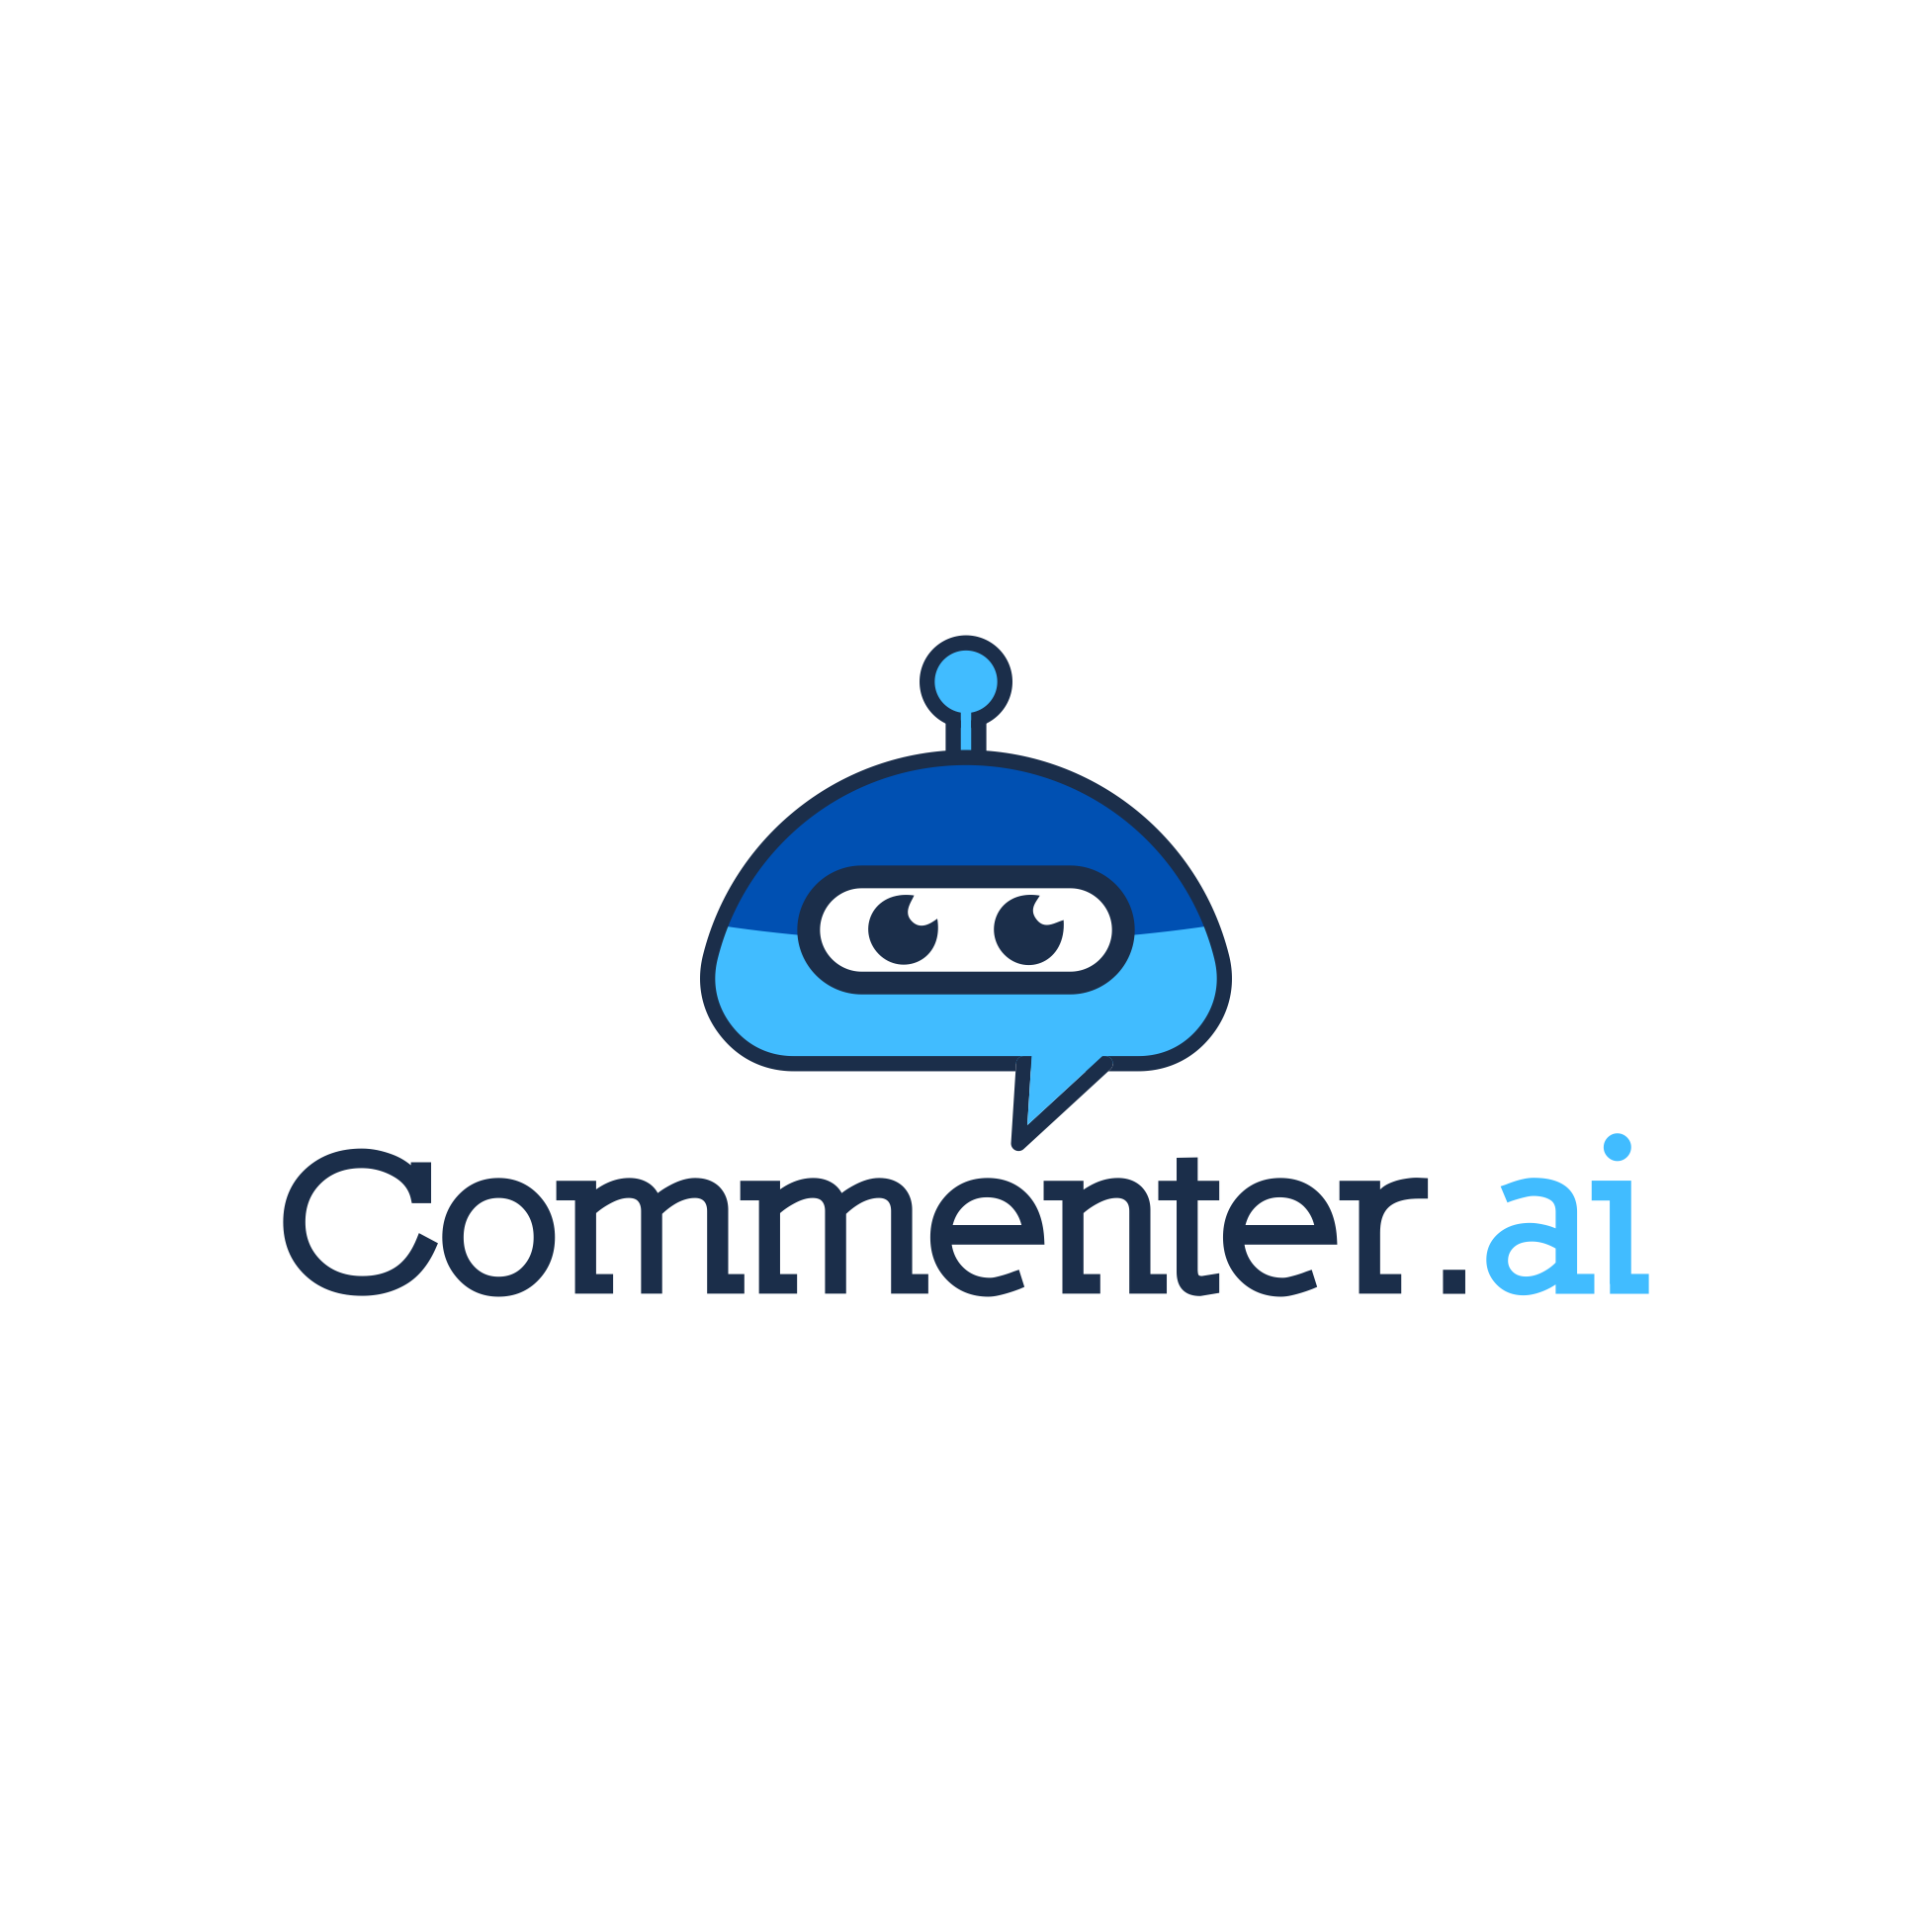 Commenter.ai | Coming soon